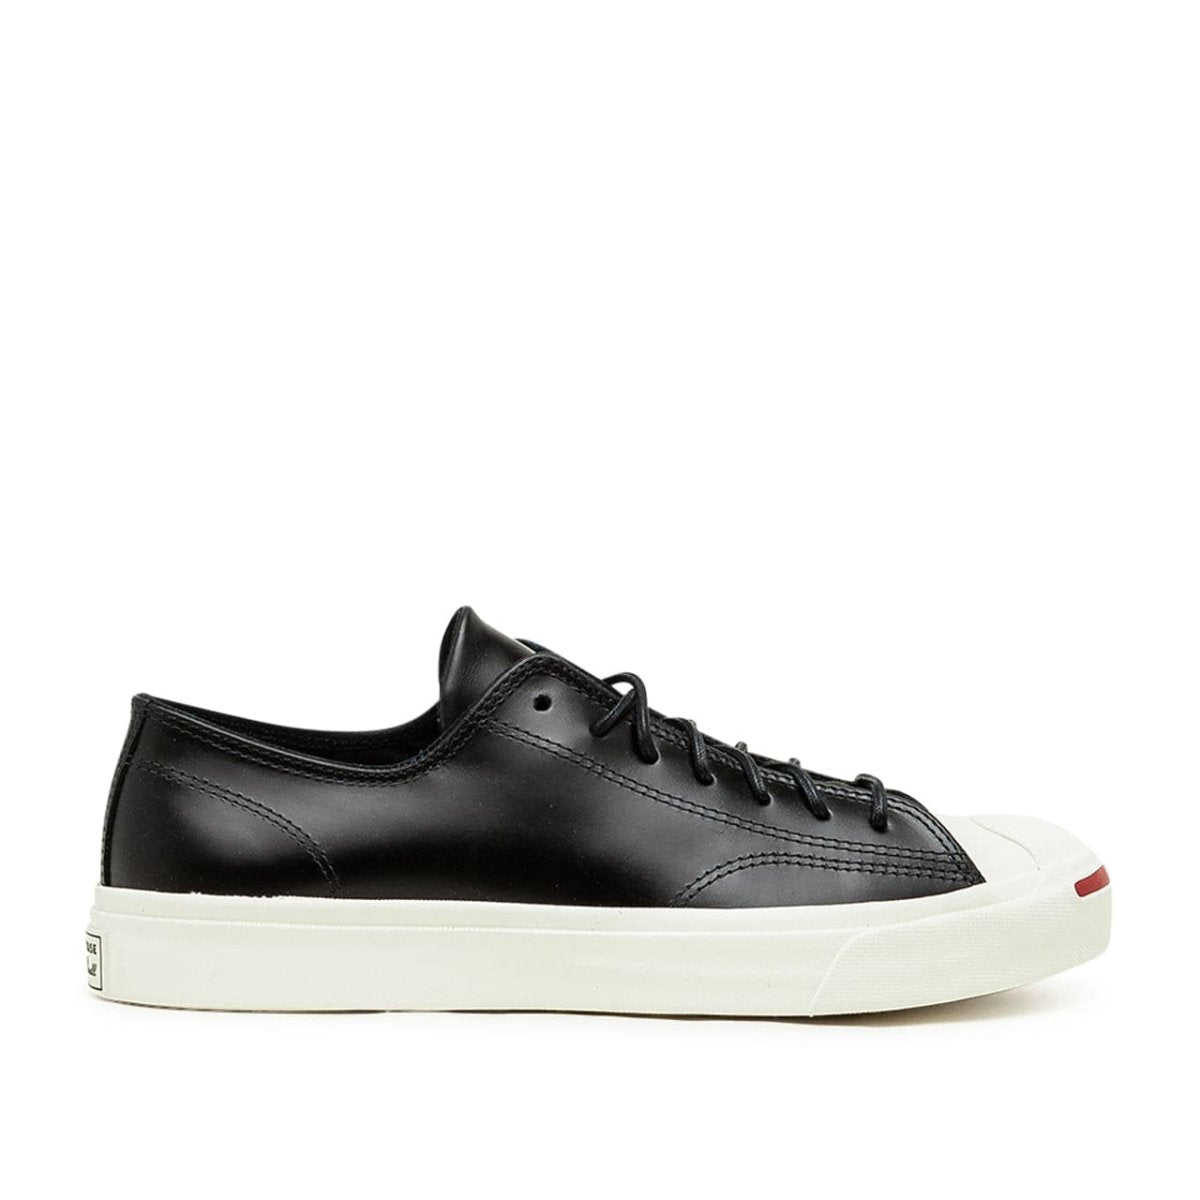 Converse Jack Purcell Leather OX (Black / White)